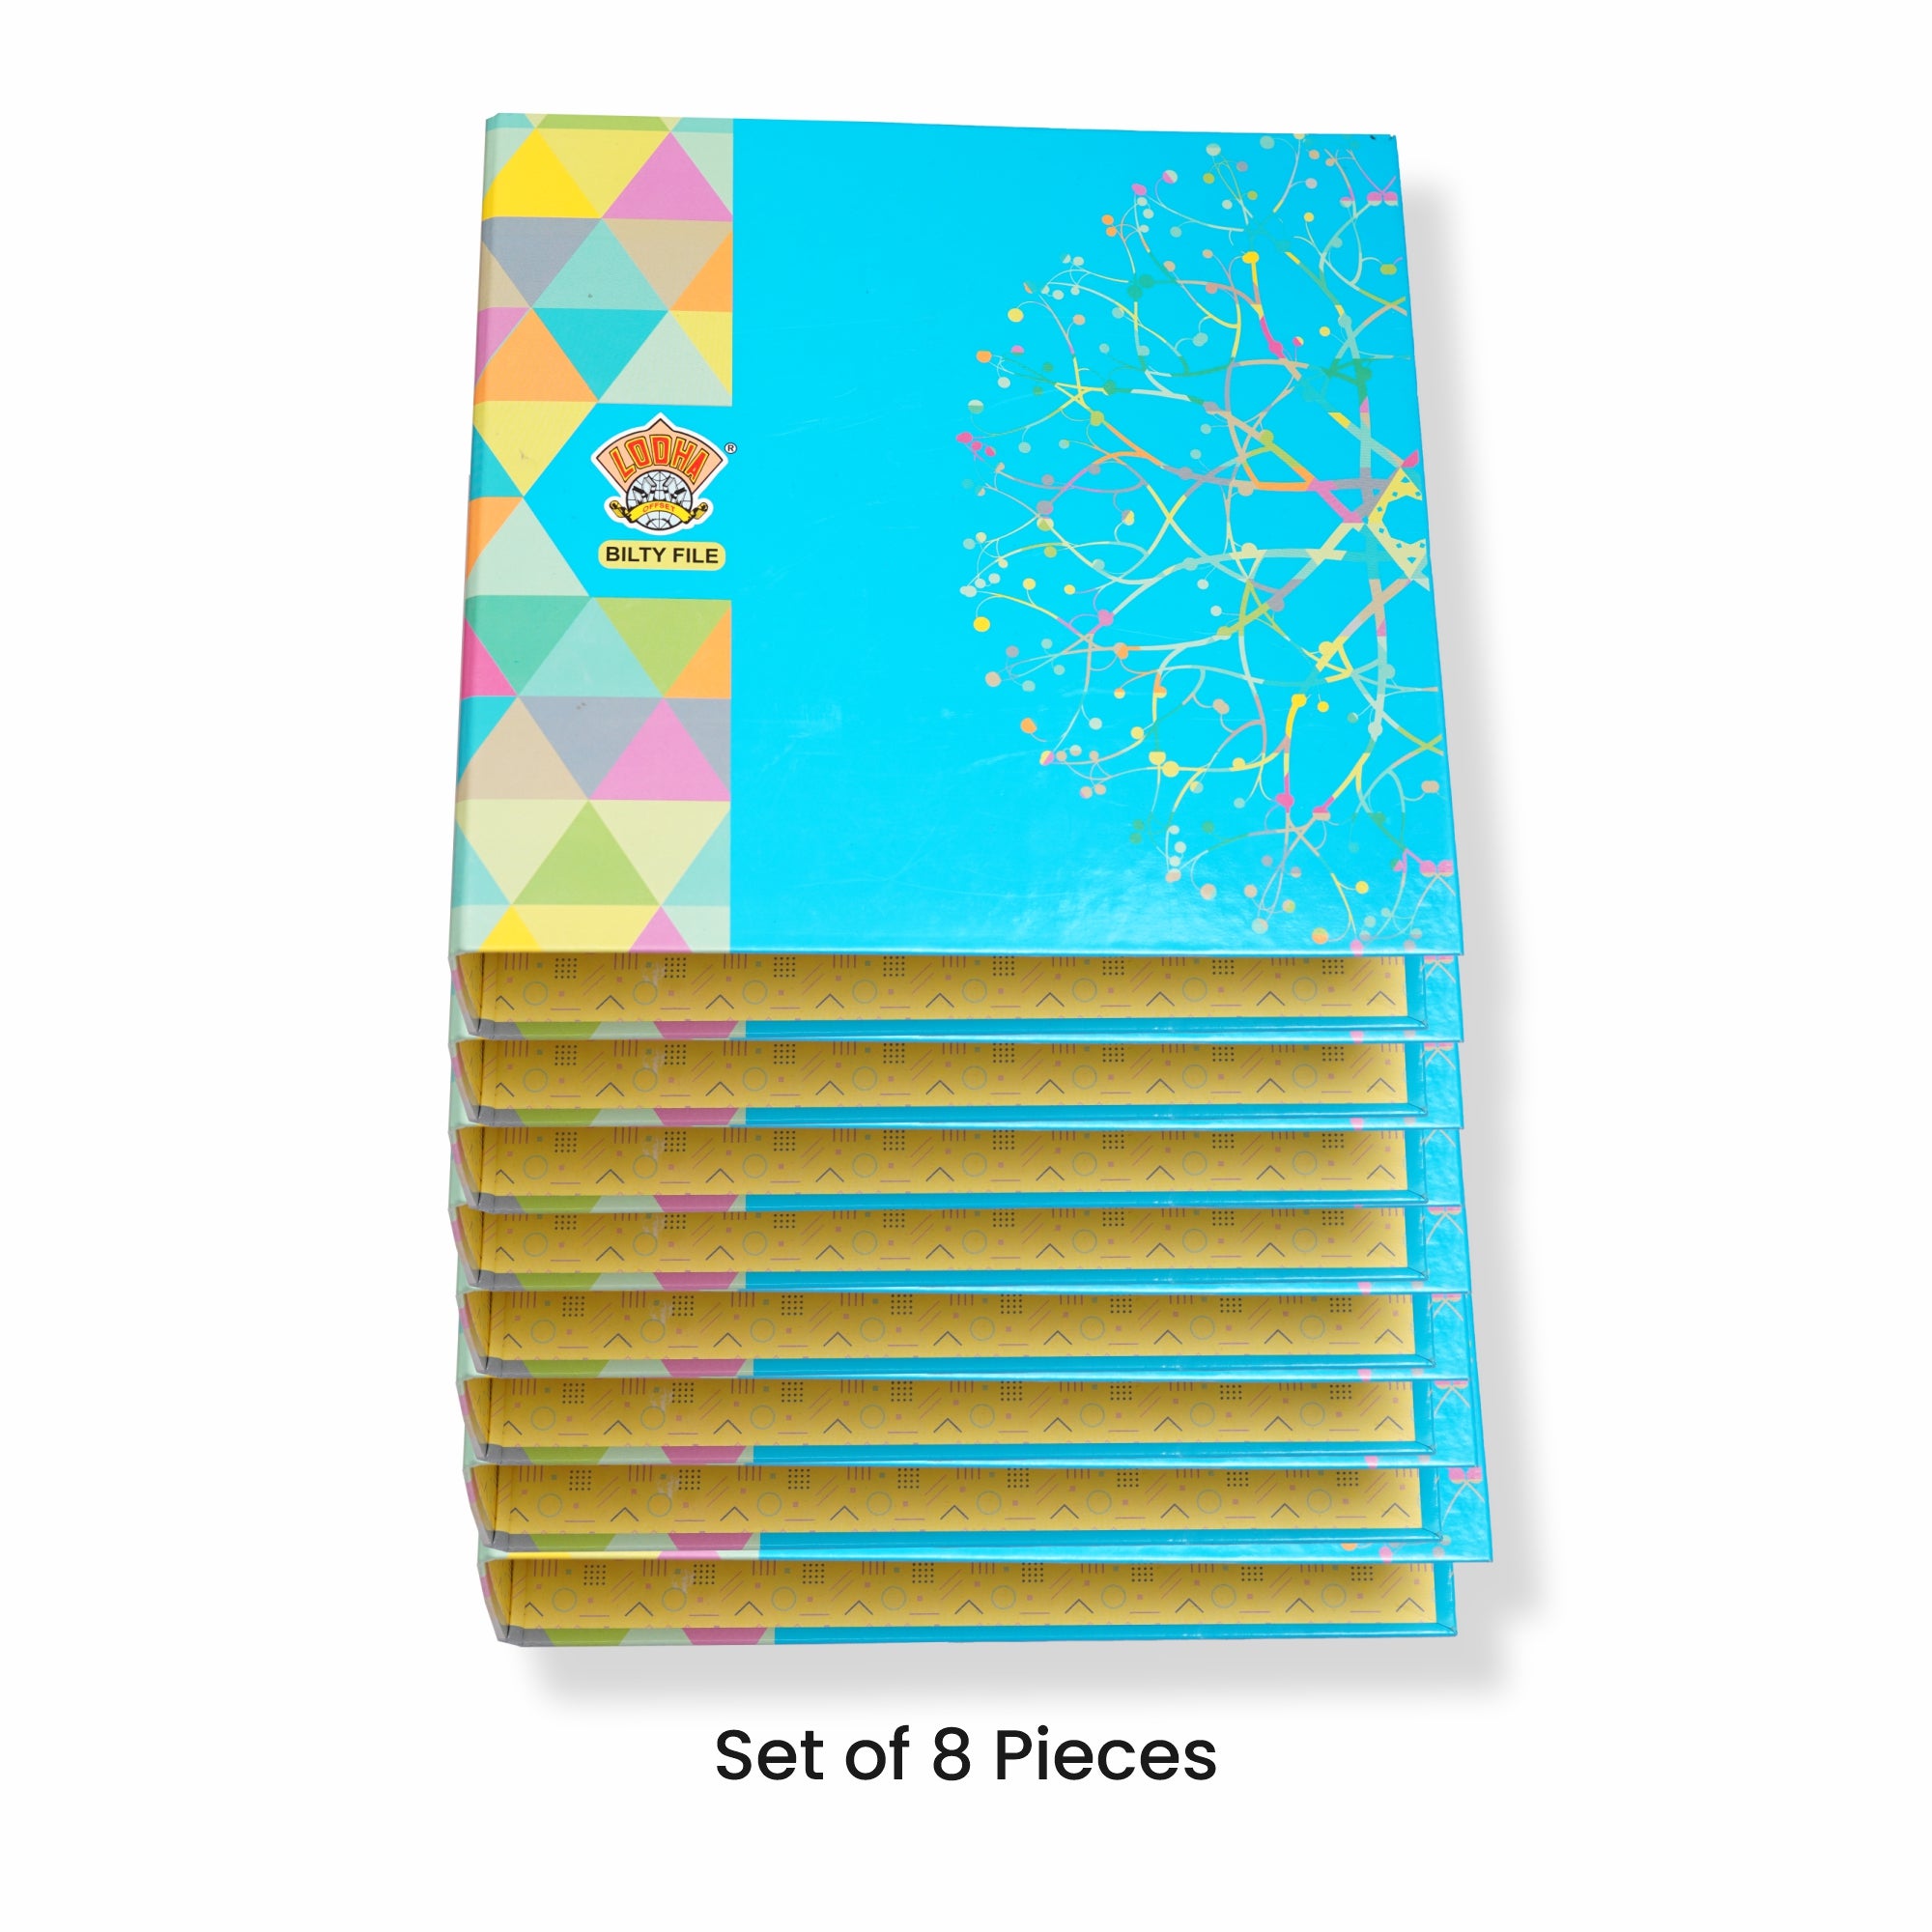 Bilty File (Set of 8) | 10 x 10.5 x 3 inches